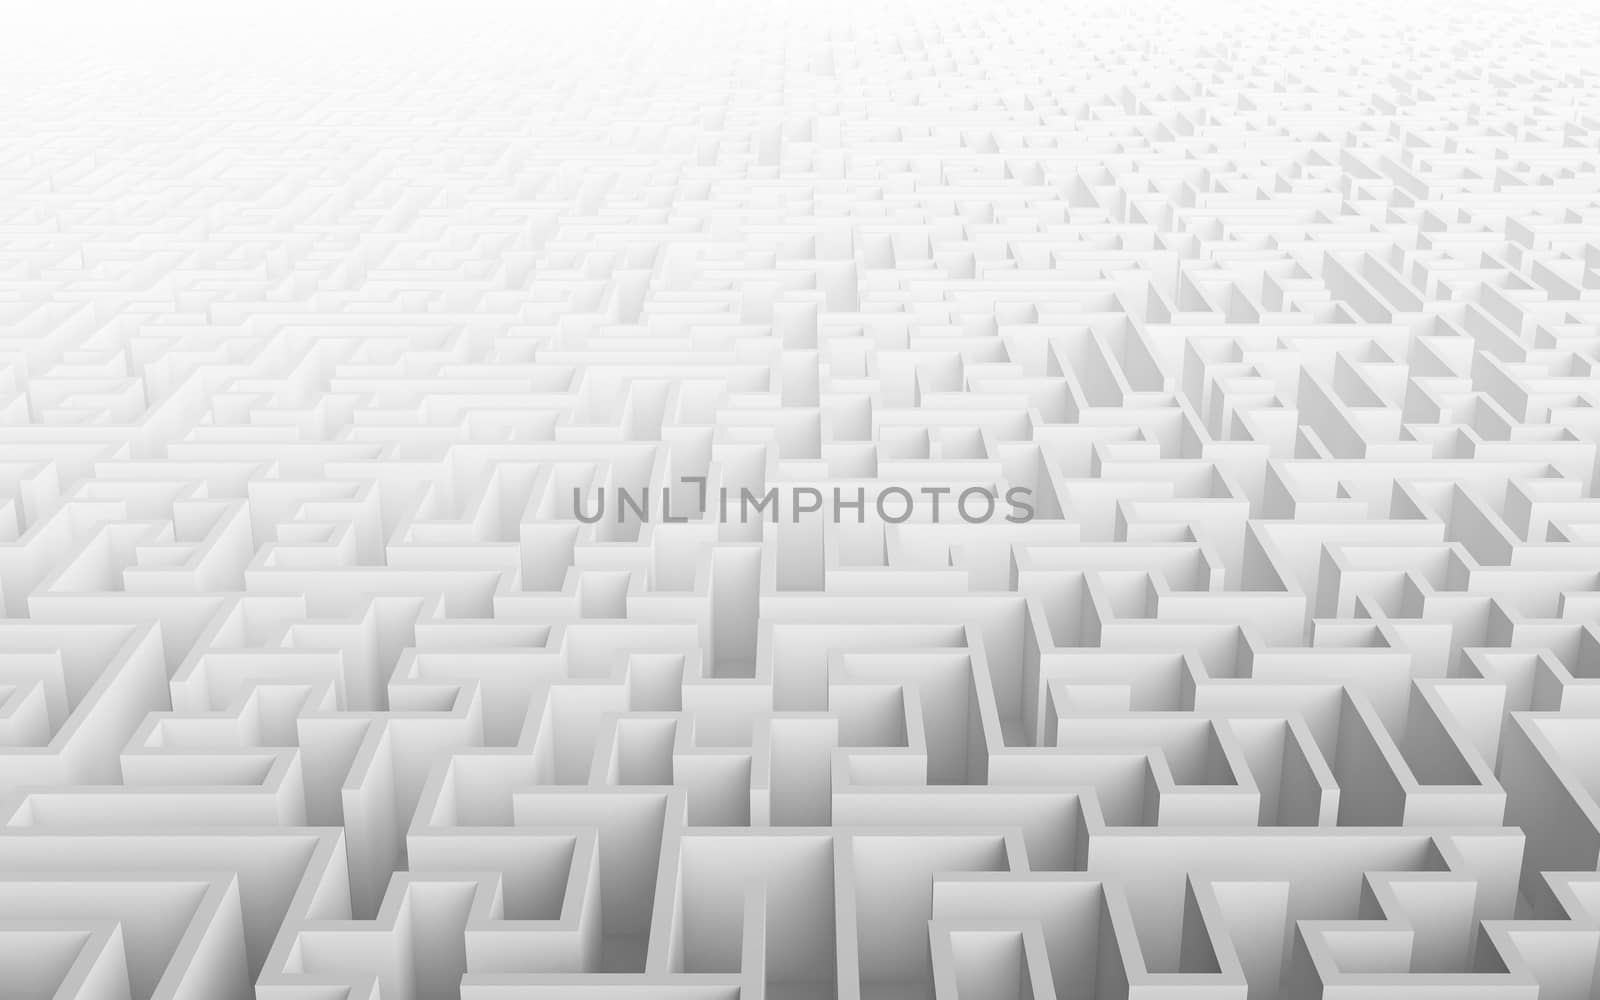 High quality illustration of a large maze or labyrinth by teerawit